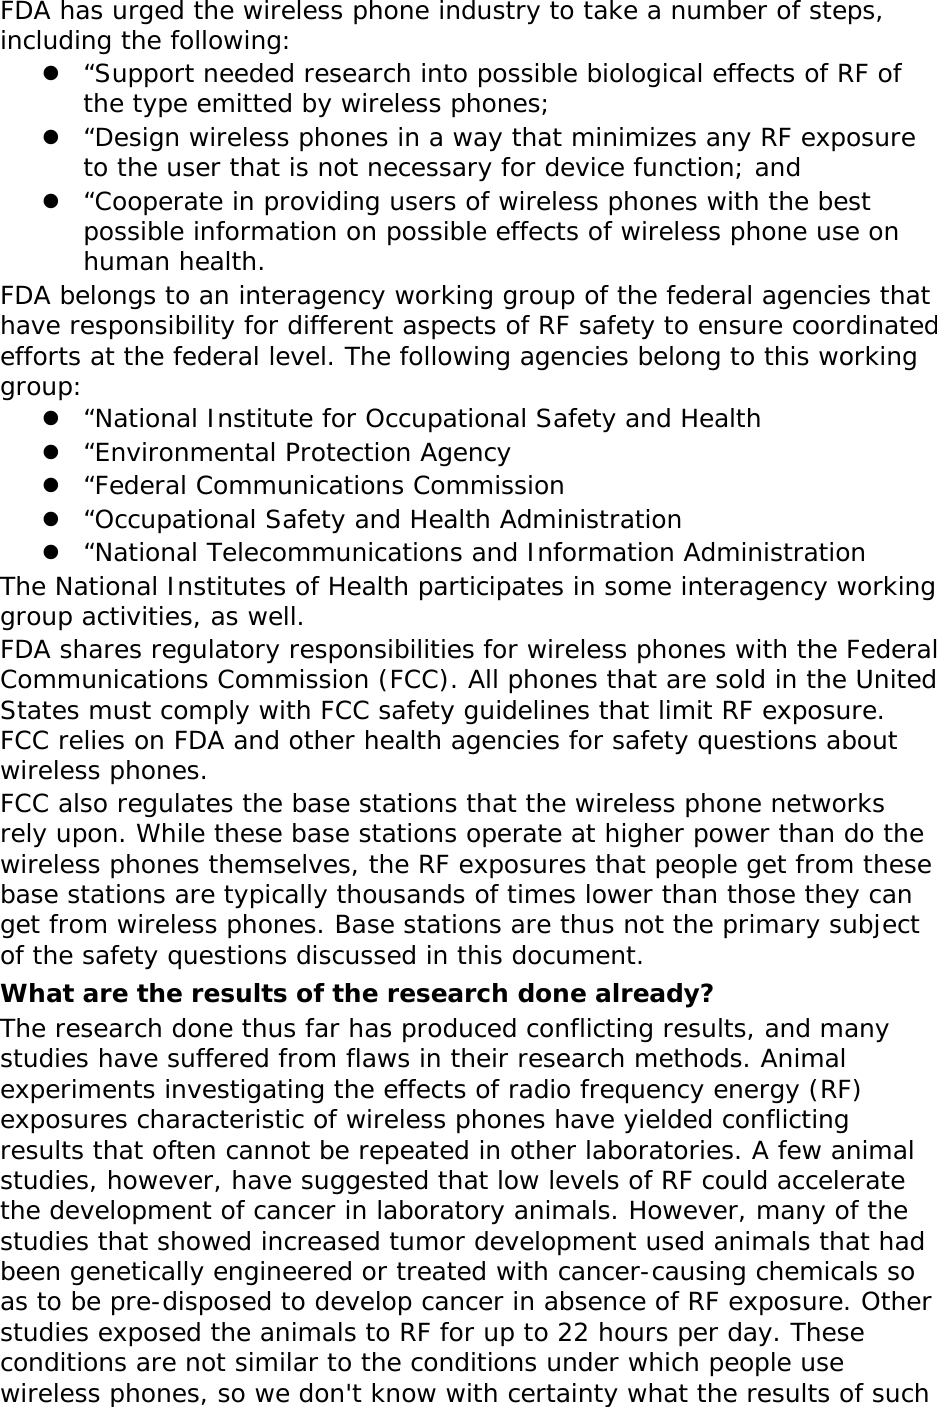 FDA has urged the wireless phone industry to take a number of steps, including the following: z “Support needed research into possible biological effects of RF of the type emitted by wireless phones; z “Design wireless phones in a way that minimizes any RF exposure to the user that is not necessary for device function; and z “Cooperate in providing users of wireless phones with the best possible information on possible effects of wireless phone use on human health. FDA belongs to an interagency working group of the federal agencies that have responsibility for different aspects of RF safety to ensure coordinated efforts at the federal level. The following agencies belong to this working group: z “National Institute for Occupational Safety and Health z “Environmental Protection Agency z “Federal Communications Commission z “Occupational Safety and Health Administration z “National Telecommunications and Information Administration The National Institutes of Health participates in some interagency working group activities, as well. FDA shares regulatory responsibilities for wireless phones with the Federal Communications Commission (FCC). All phones that are sold in the United States must comply with FCC safety guidelines that limit RF exposure. FCC relies on FDA and other health agencies for safety questions about wireless phones. FCC also regulates the base stations that the wireless phone networks rely upon. While these base stations operate at higher power than do the wireless phones themselves, the RF exposures that people get from these base stations are typically thousands of times lower than those they can get from wireless phones. Base stations are thus not the primary subject of the safety questions discussed in this document. What are the results of the research done already? The research done thus far has produced conflicting results, and many studies have suffered from flaws in their research methods. Animal experiments investigating the effects of radio frequency energy (RF) exposures characteristic of wireless phones have yielded conflicting results that often cannot be repeated in other laboratories. A few animal studies, however, have suggested that low levels of RF could accelerate the development of cancer in laboratory animals. However, many of the studies that showed increased tumor development used animals that had been genetically engineered or treated with cancer-causing chemicals so as to be pre-disposed to develop cancer in absence of RF exposure. Other studies exposed the animals to RF for up to 22 hours per day. These conditions are not similar to the conditions under which people use wireless phones, so we don&apos;t know with certainty what the results of such 